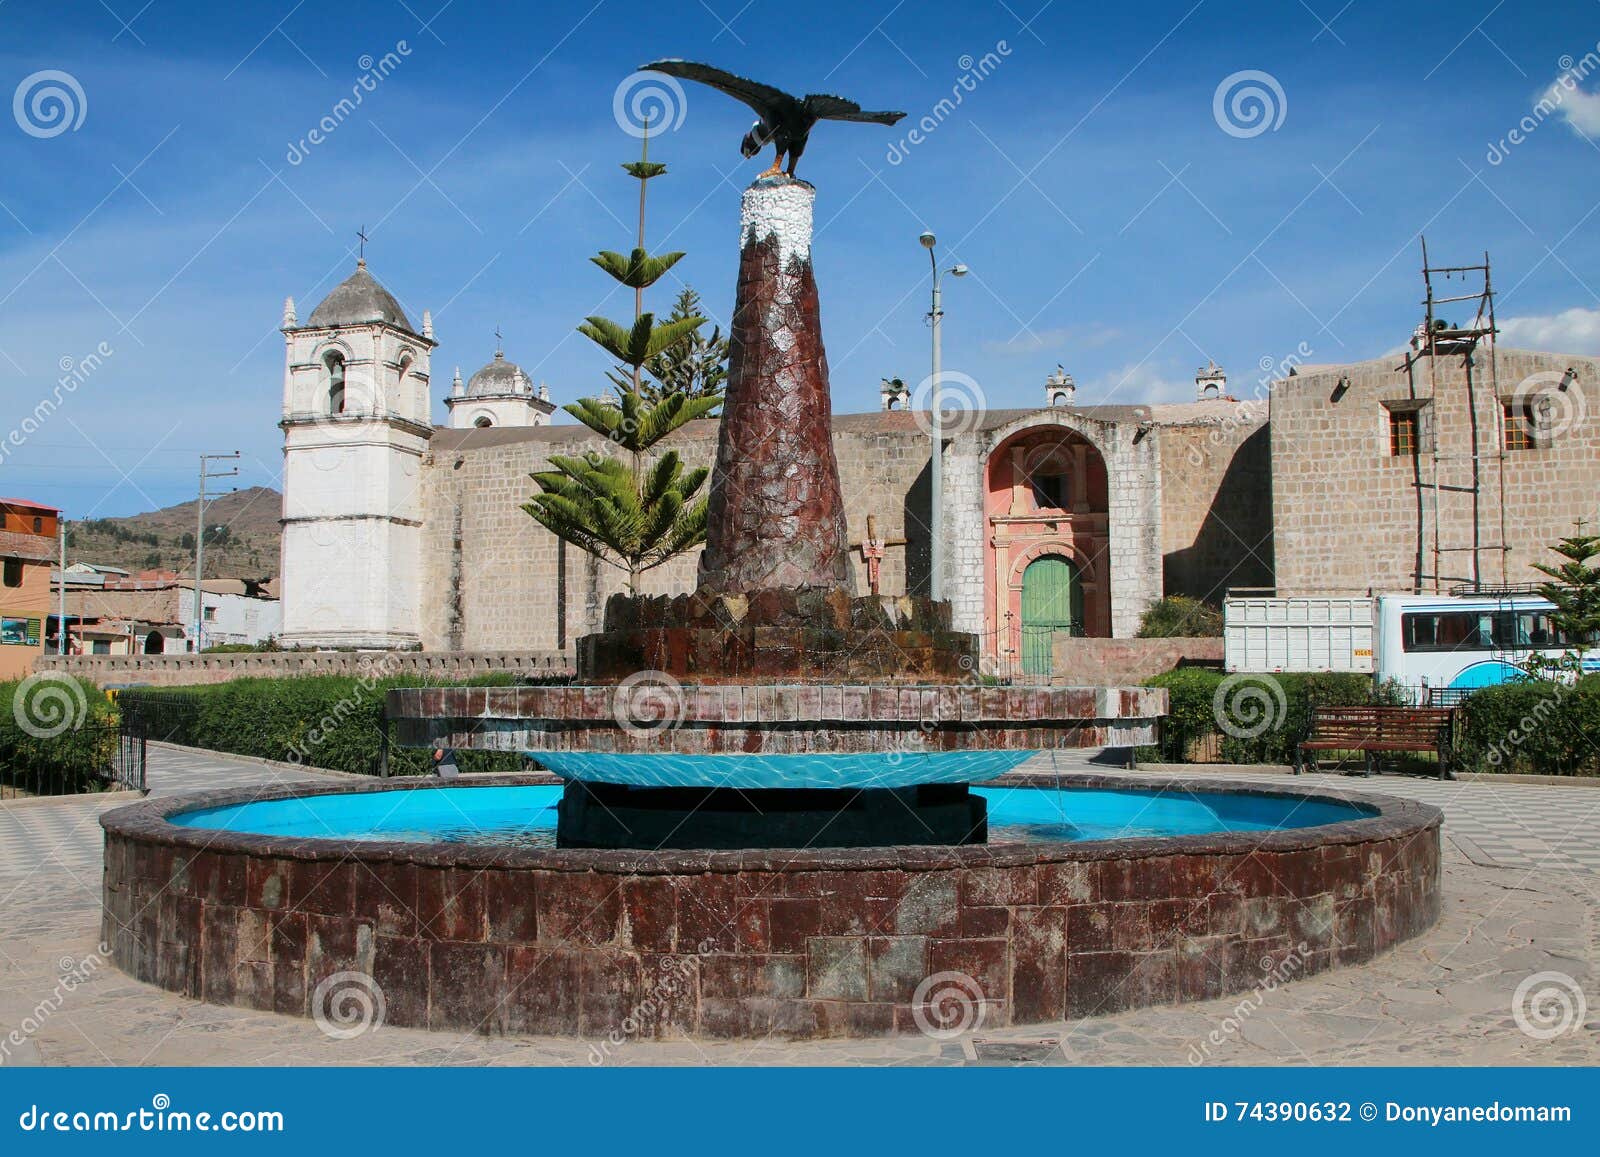 Town Of Cabanaconde Near Colca Canyon In Peru Stock Photo Image Of